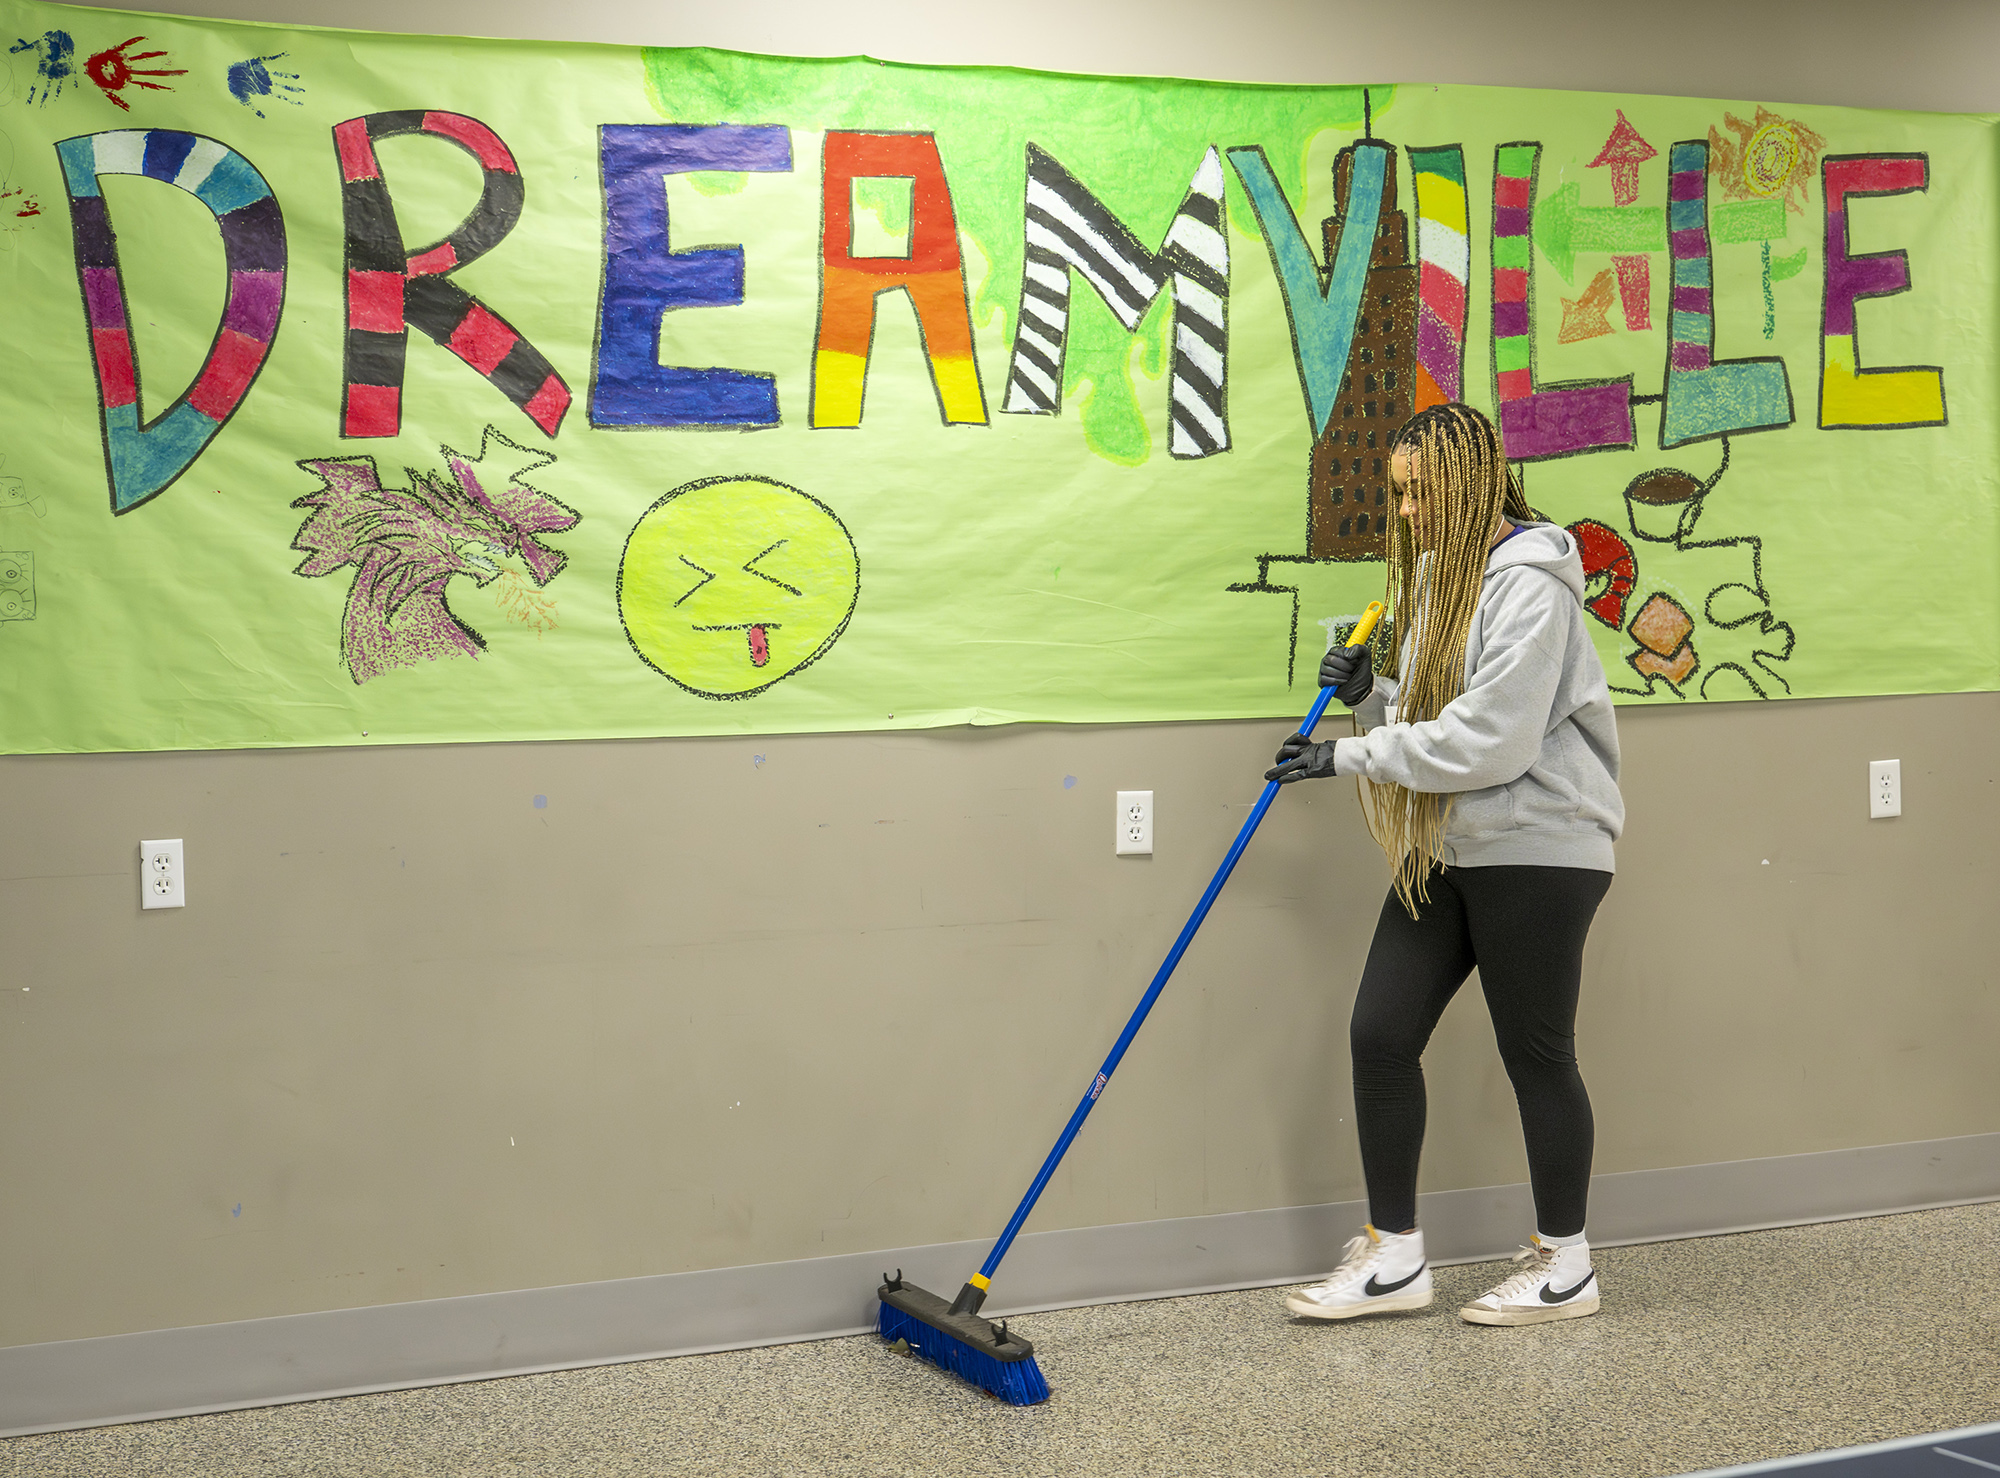 Student sweeps the floor with a Dreamville banner iin the background.